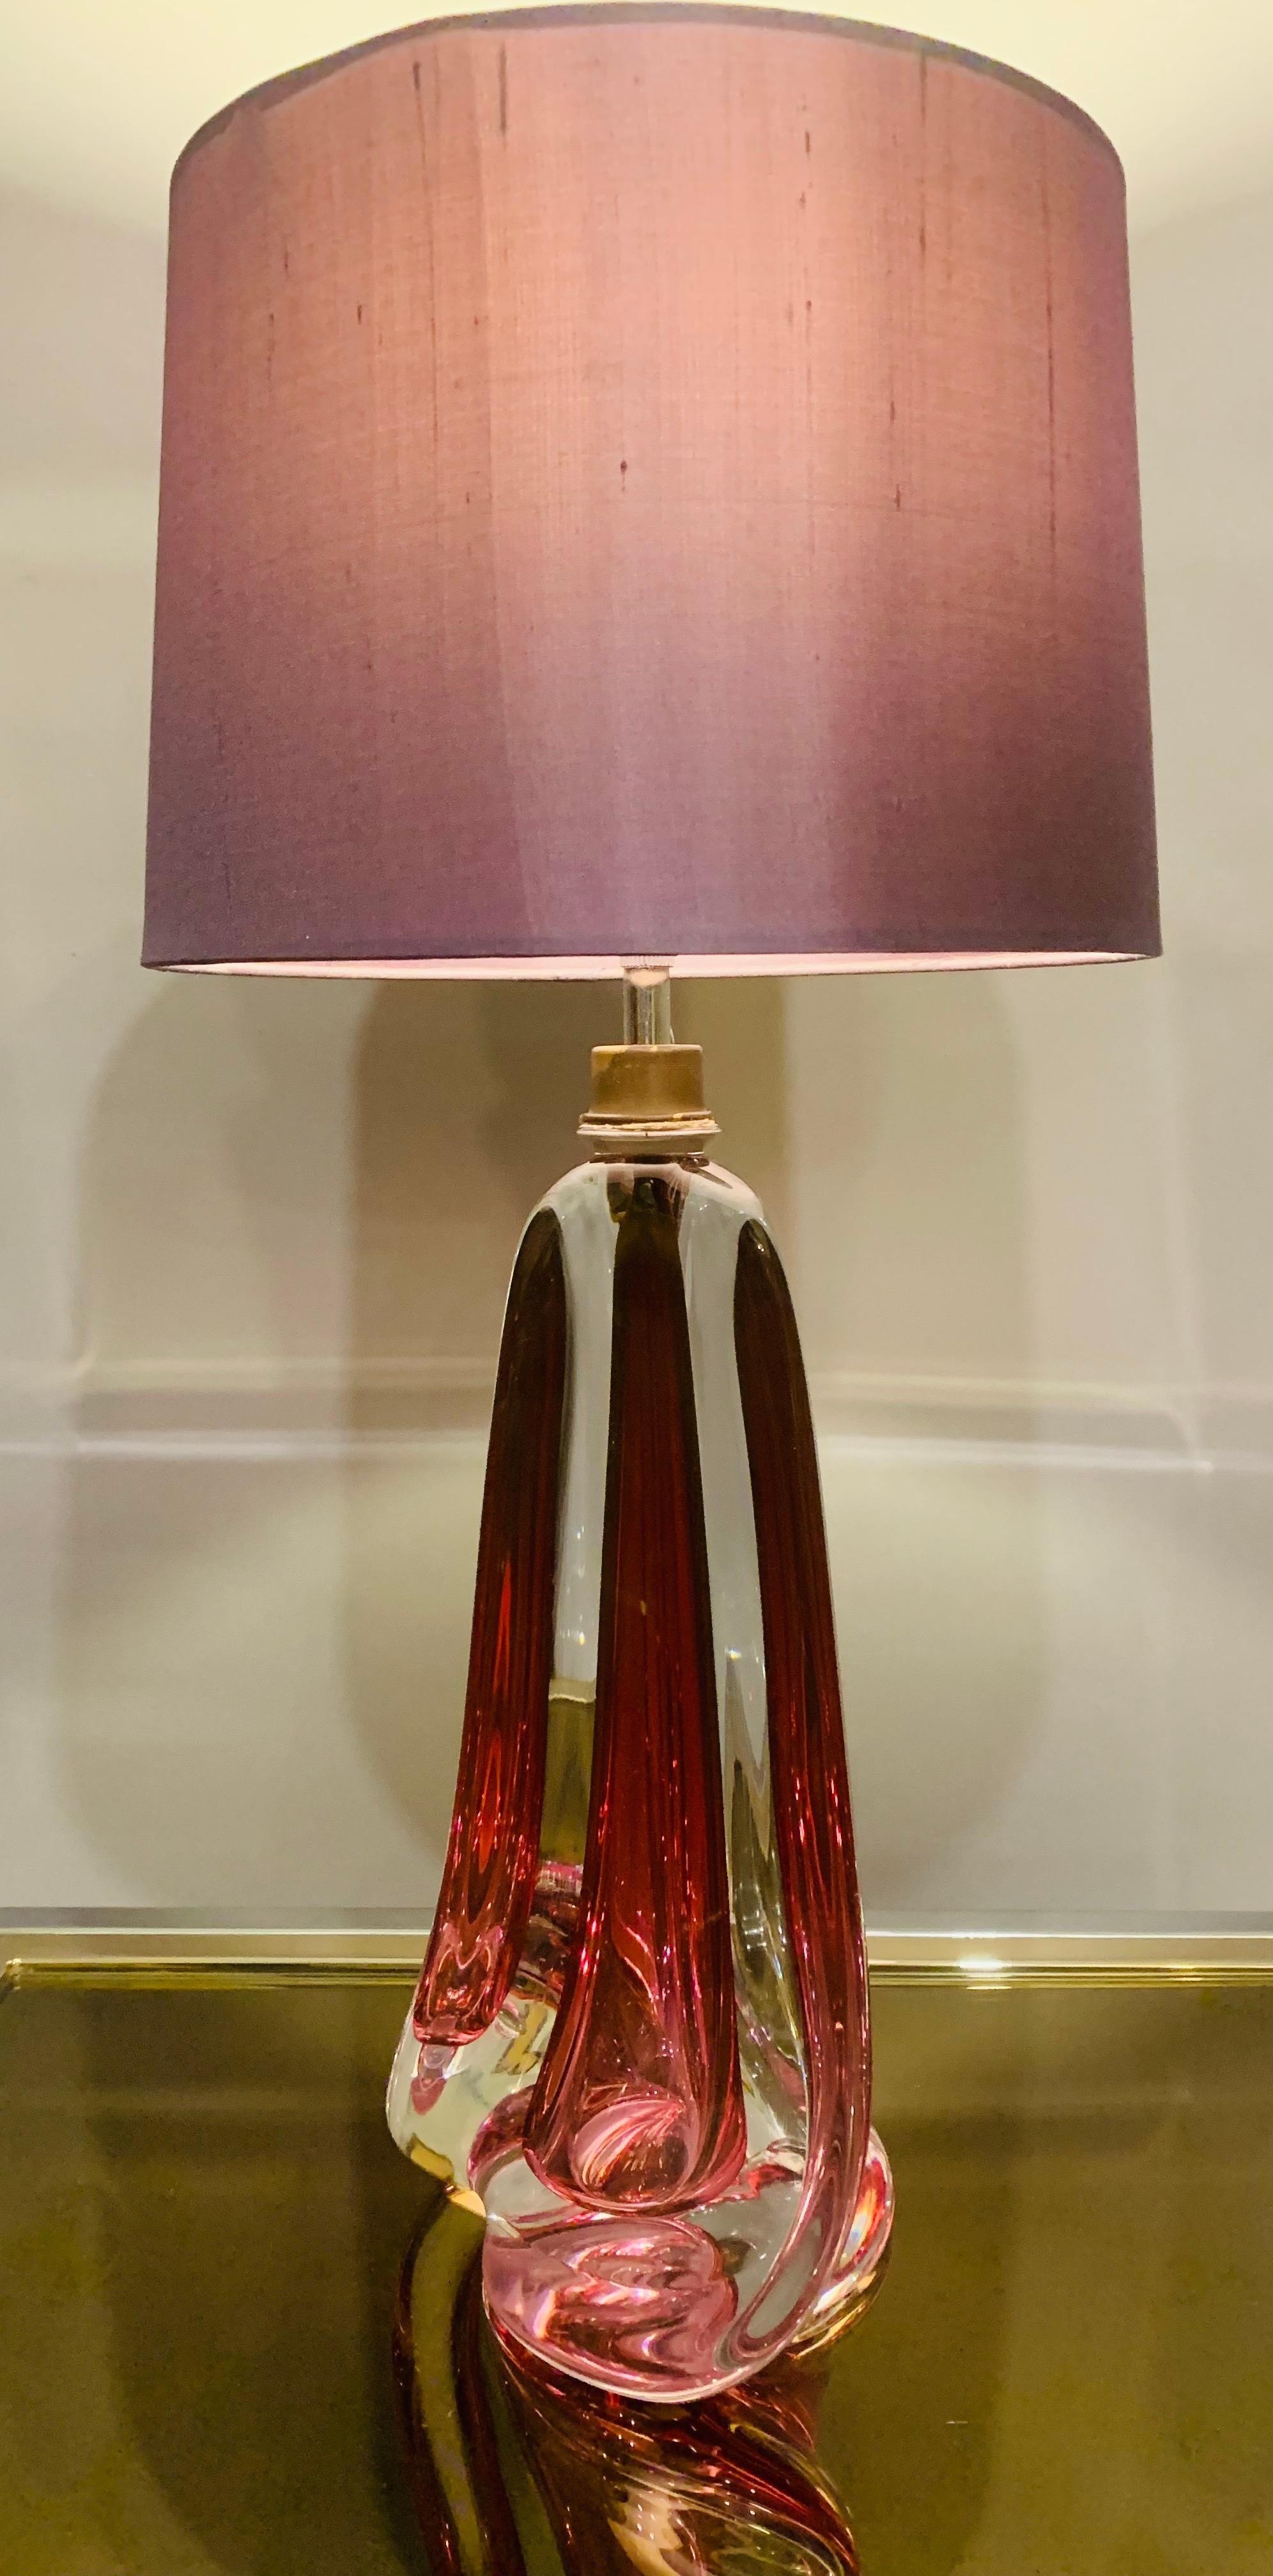 1950s Belgium Val Saint Lambert dark red and clear crystal glass table lamp of tapering geometric form with a chrome mounted bayonet bulb socket. Hand Blown in heavy lead crystal glass which makes each one unique and slightly different even if